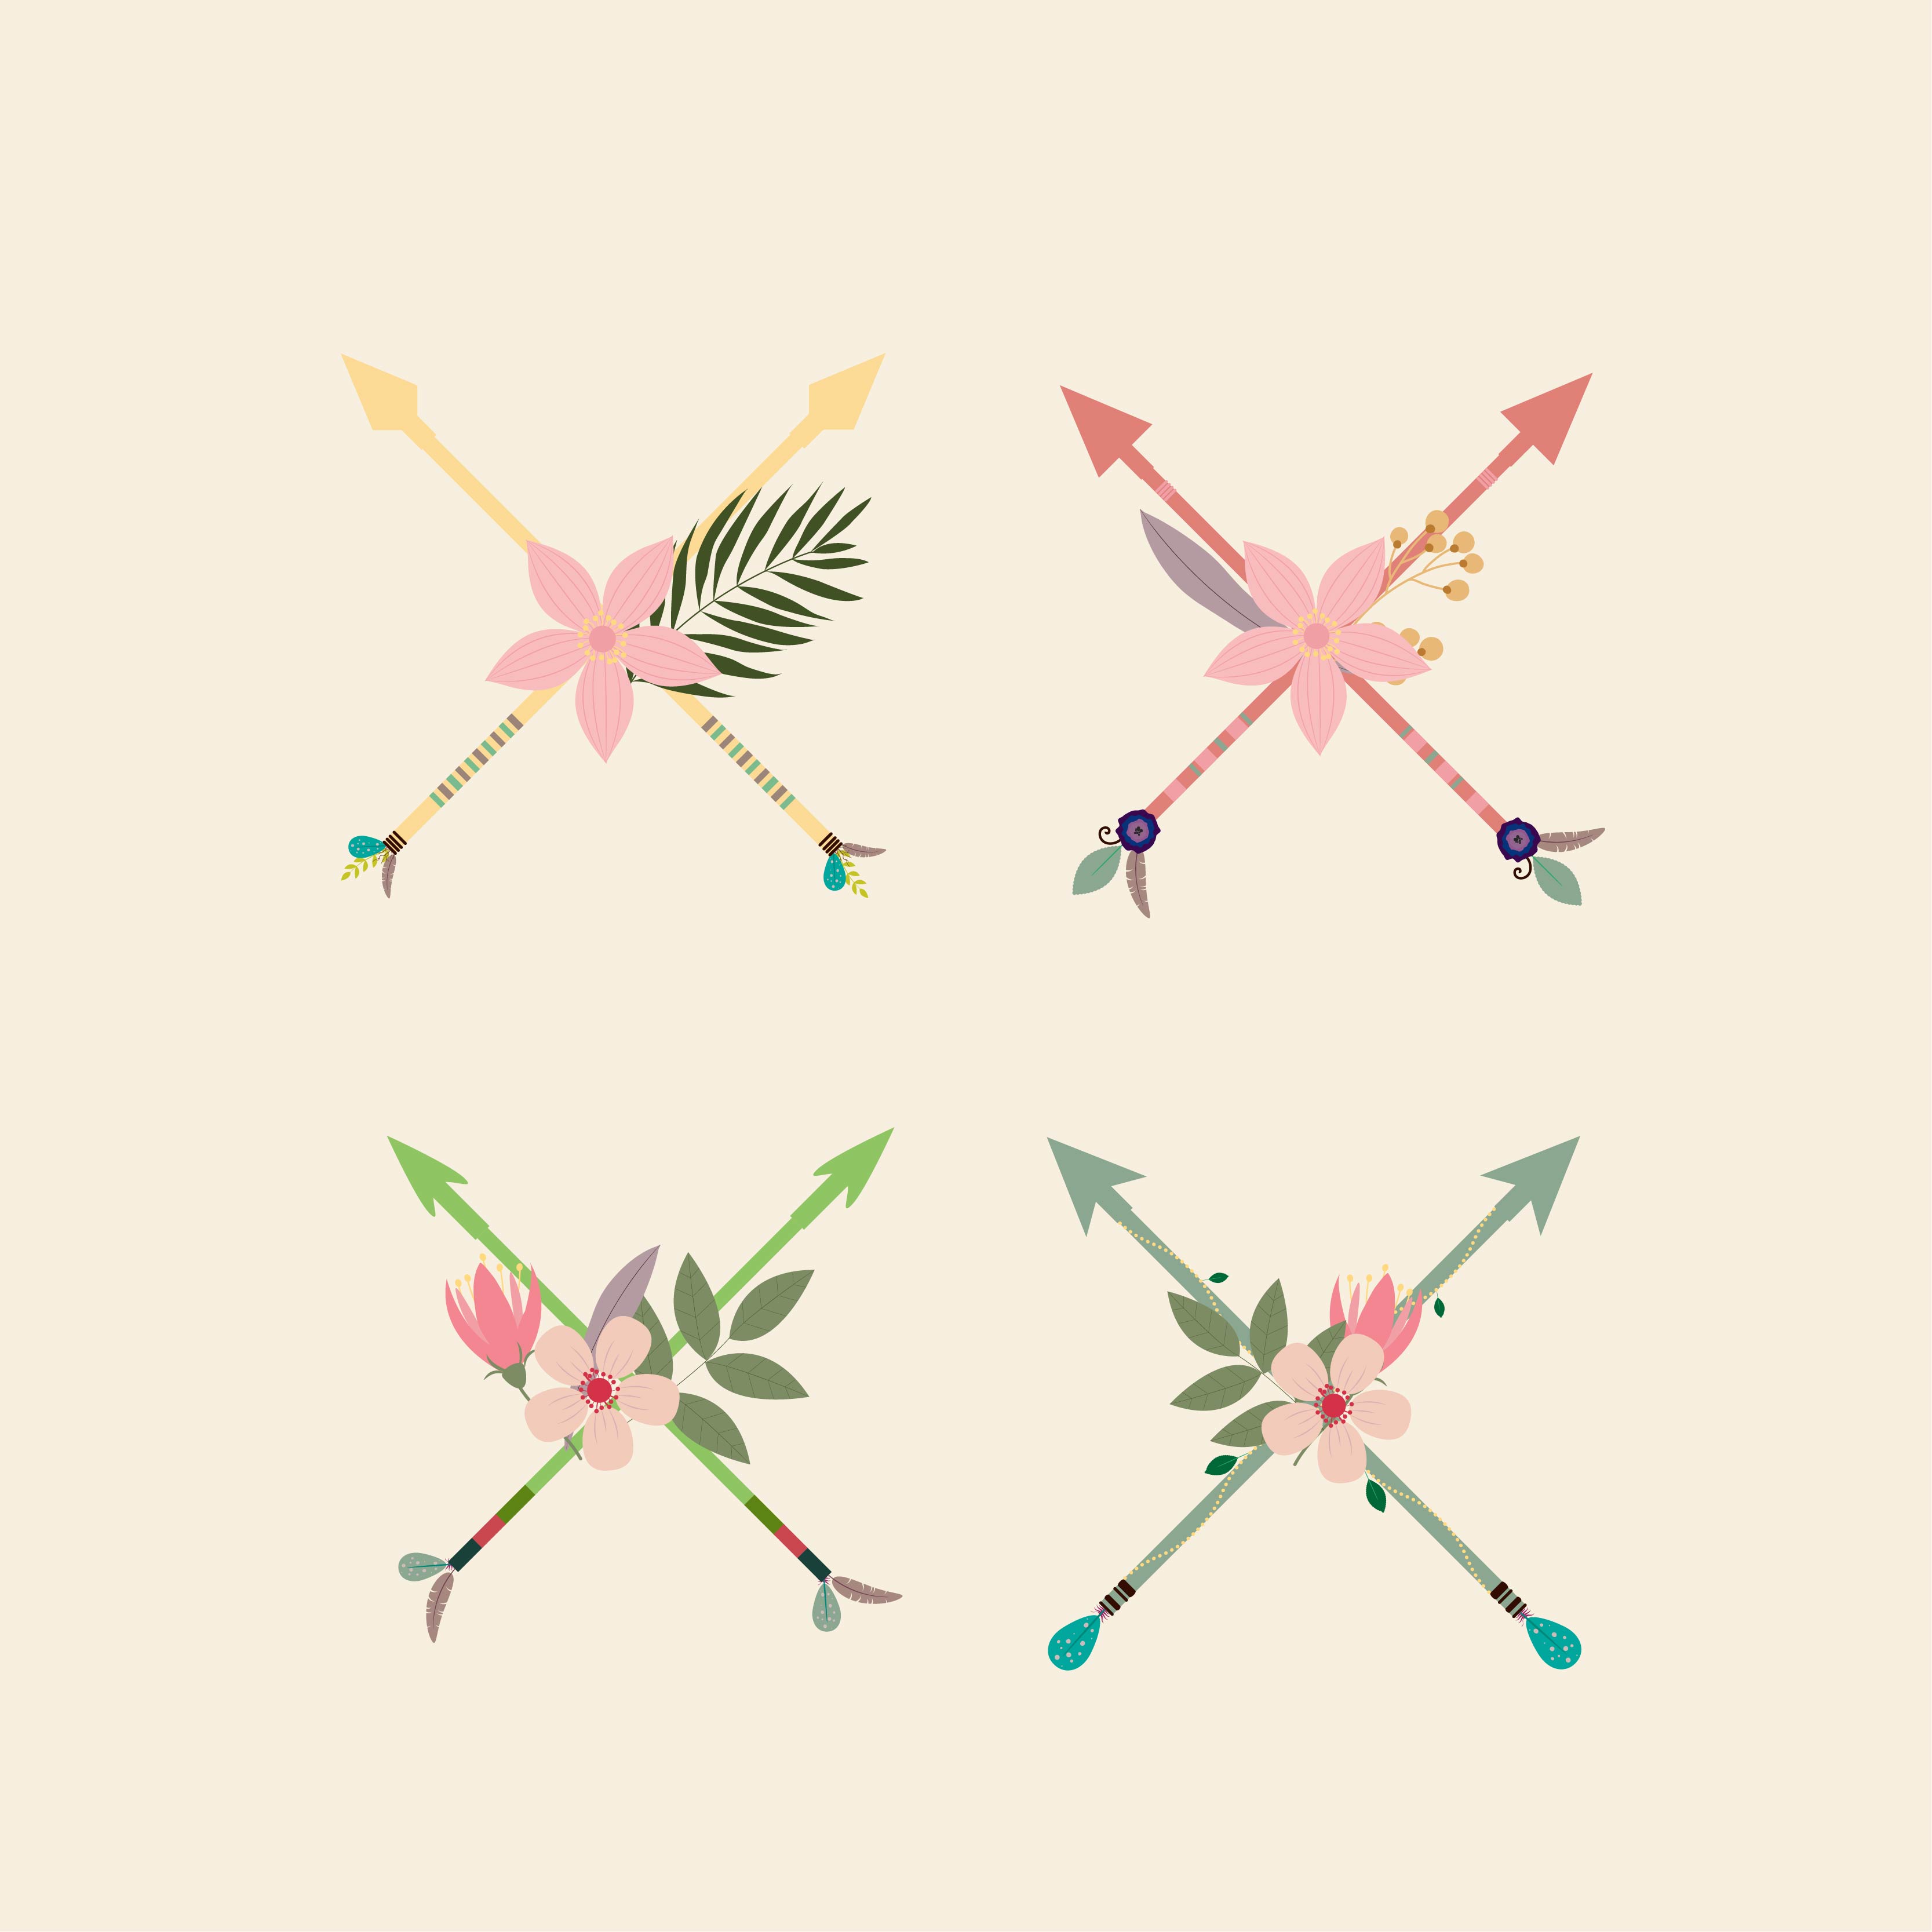 Download floral arrows collection - Download Free Vectors, Clipart ...